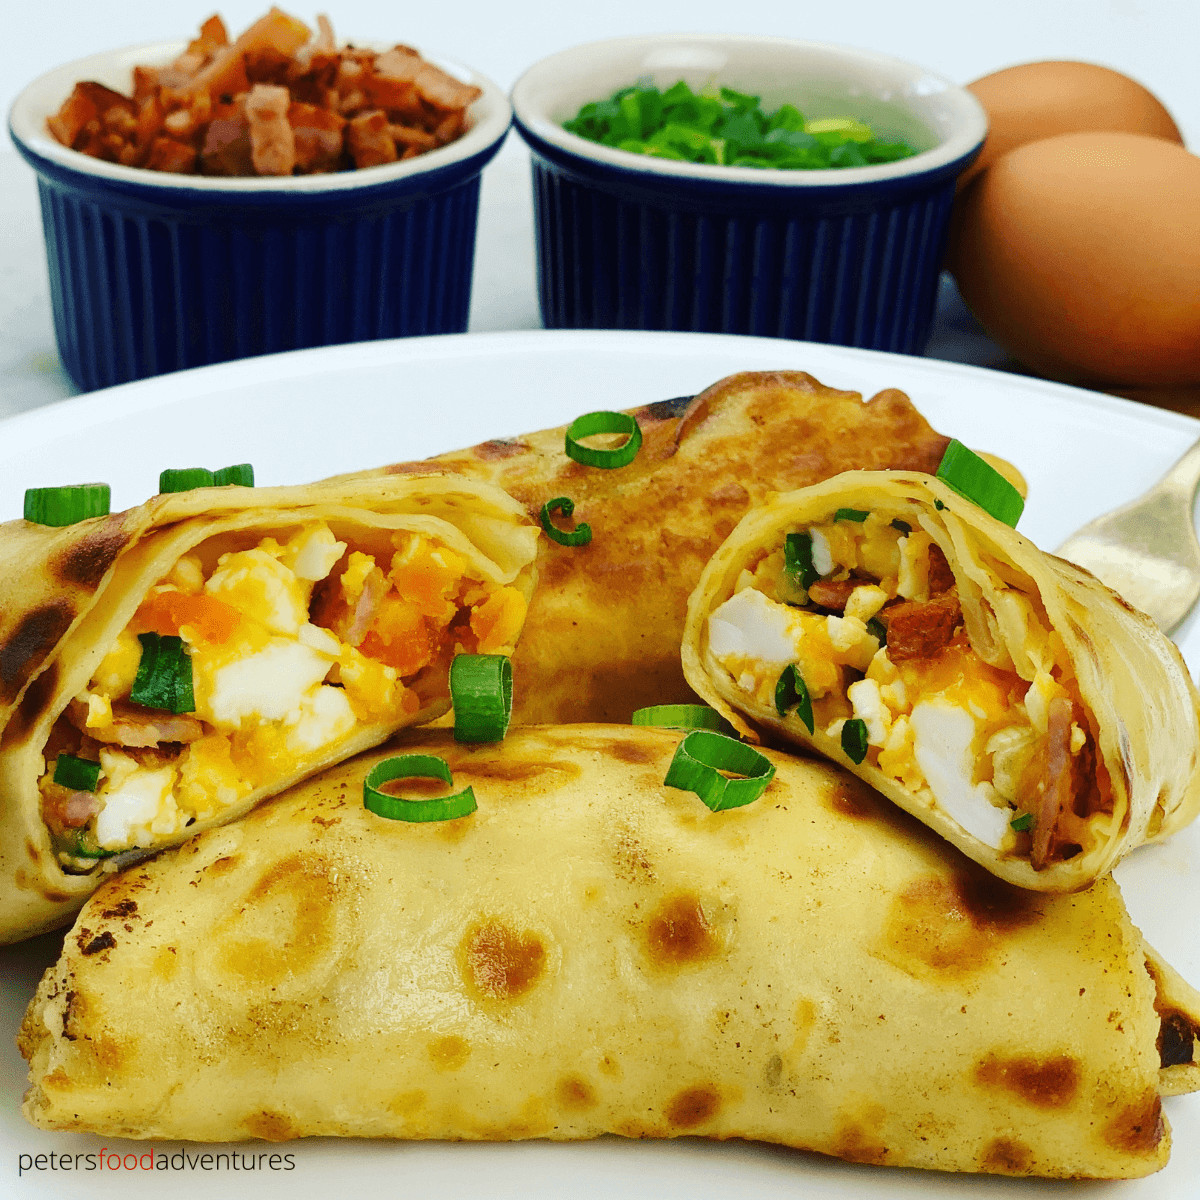 Delicious Breakfast Crepes stuffed with mediium-boiled eggs, bacon, cheese and green onions before being pan fried in butter. Generously slathered in sour cream - these savory crepes are worth the effort!